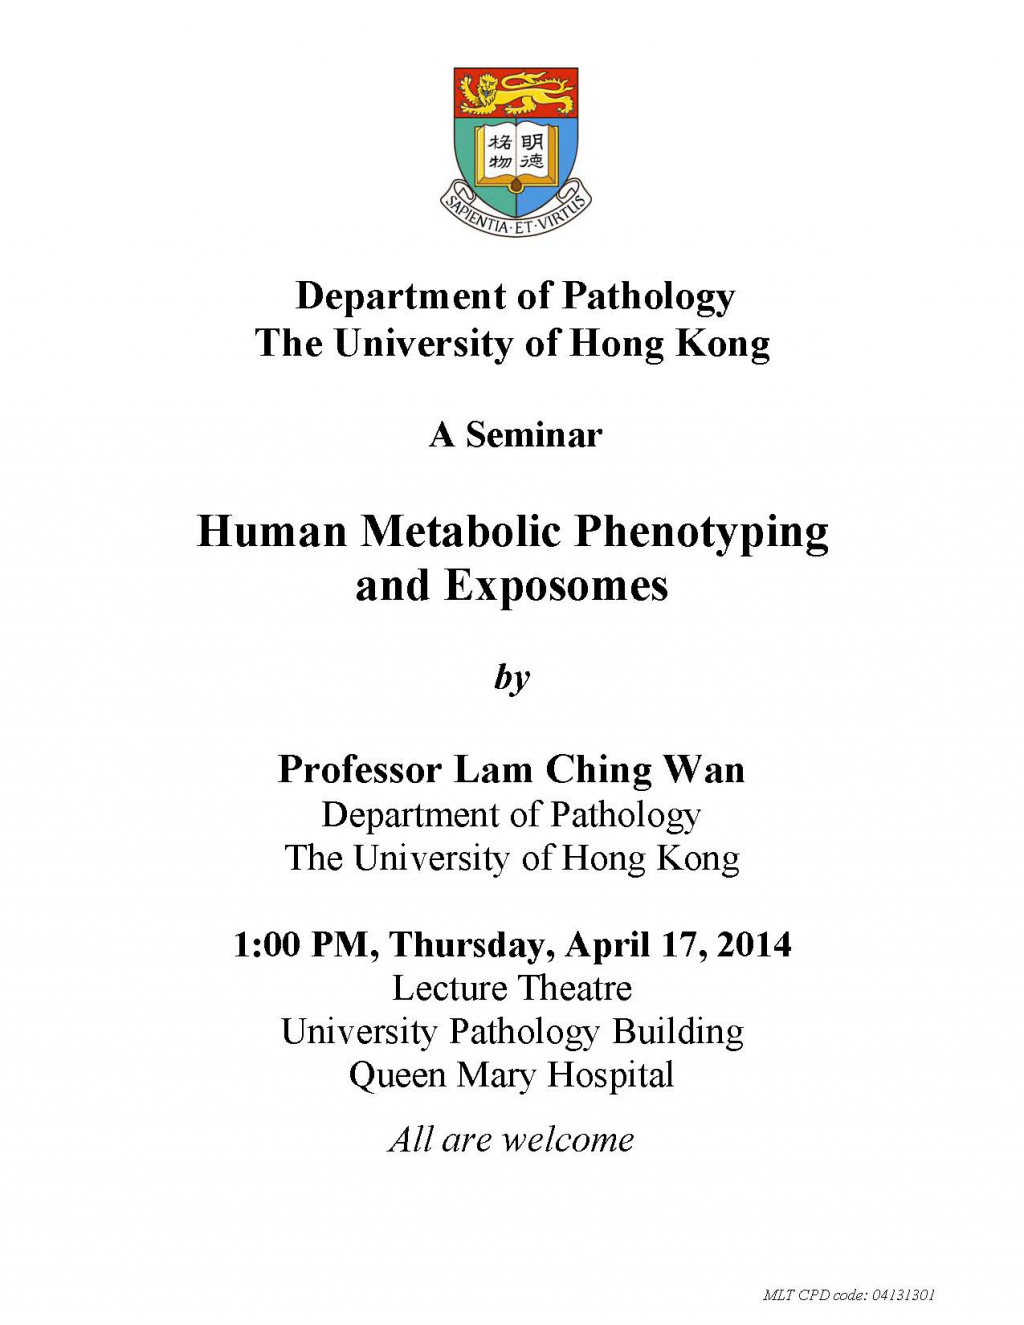 A Seminar on Human Metabolic Phenotyping and Exposomes by  Professor Lam Ching Wan